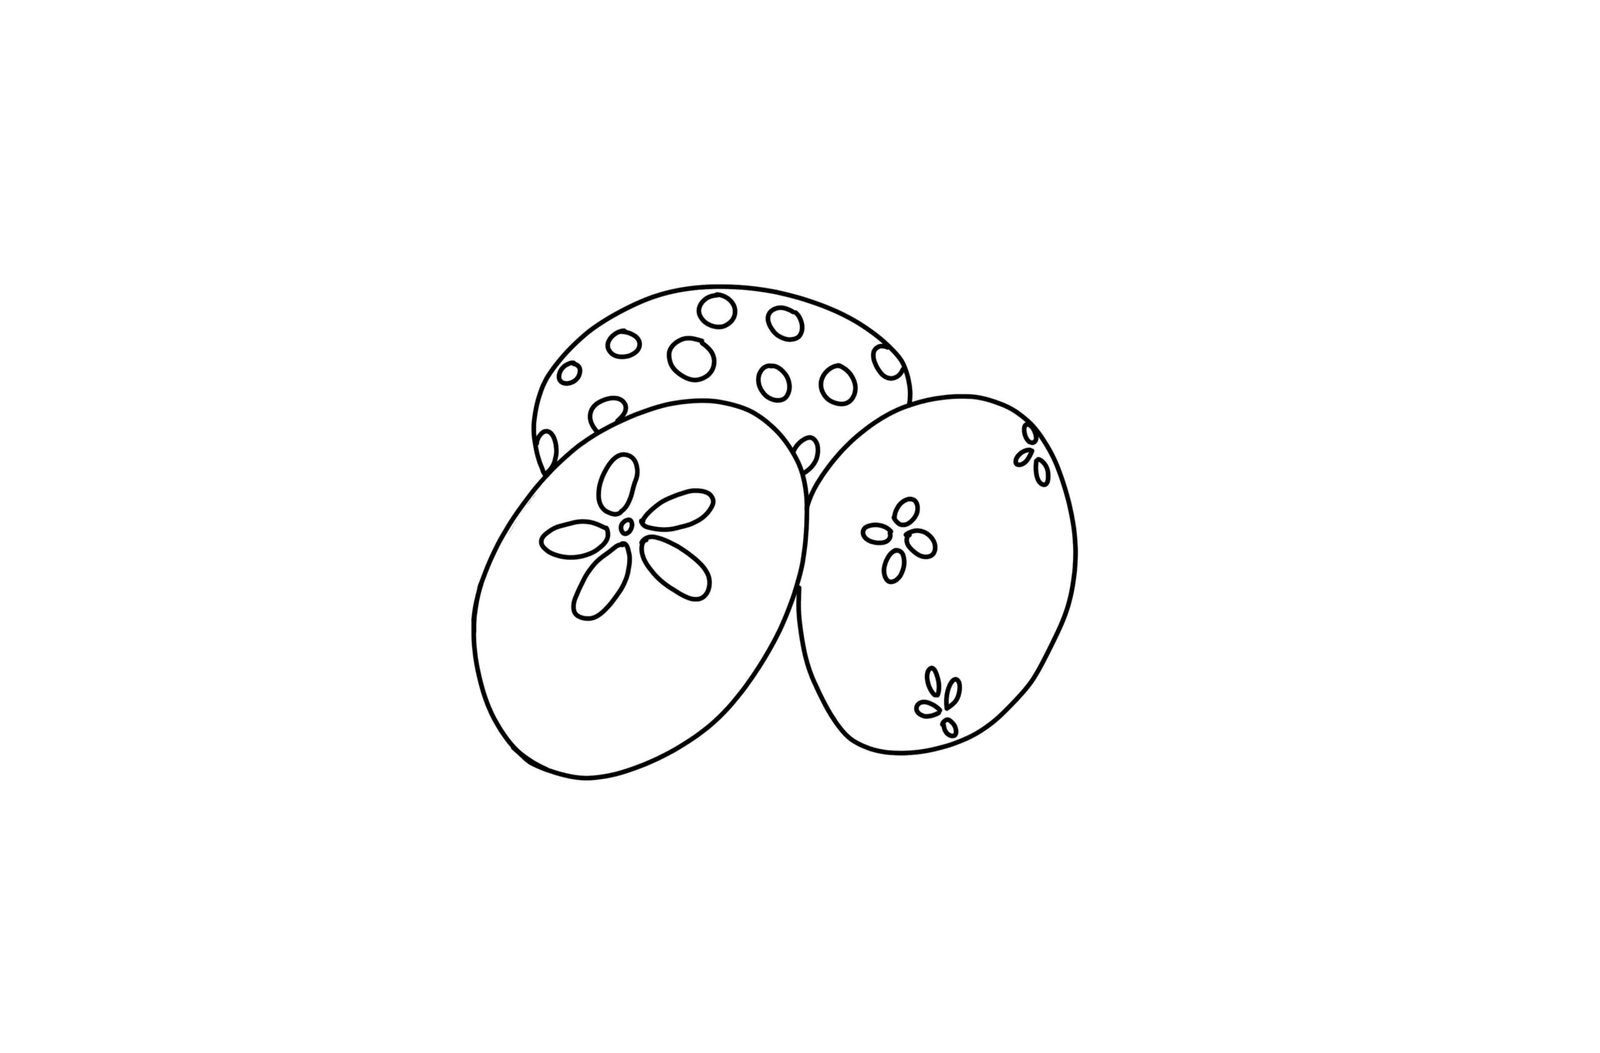 Fancy Easter Egg Coloring Page